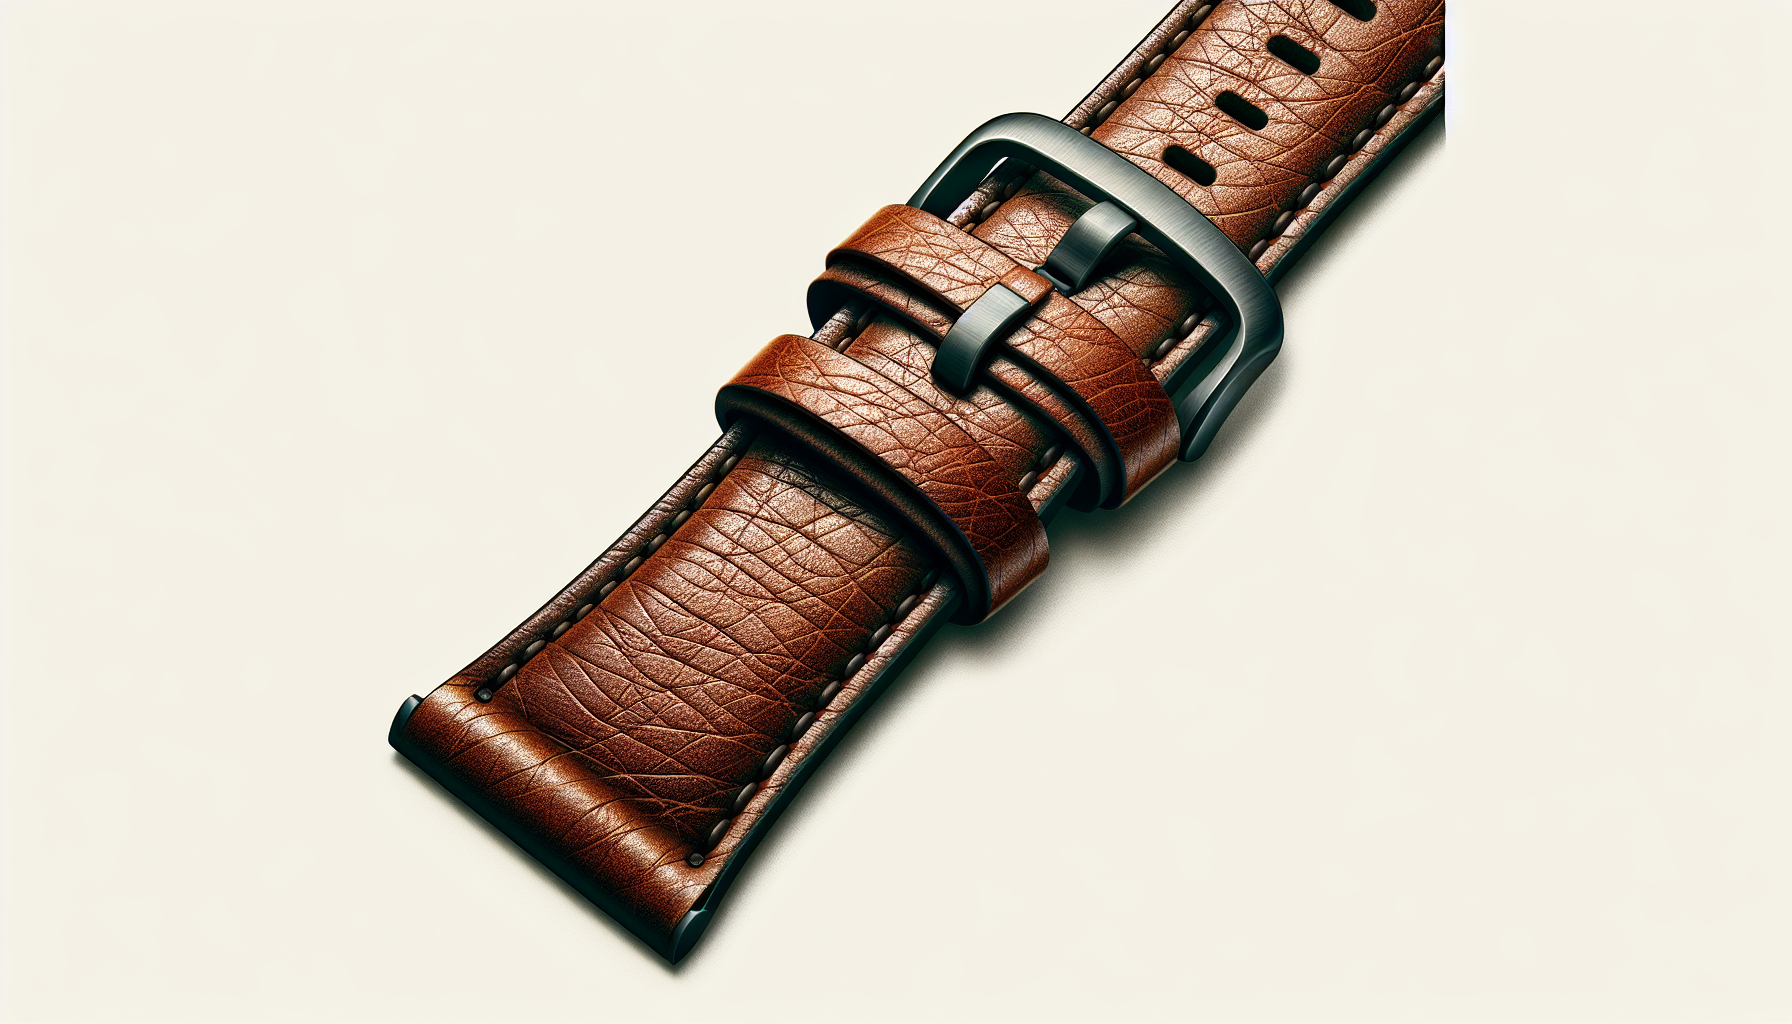 Full-grain leather watch band in natural brown color